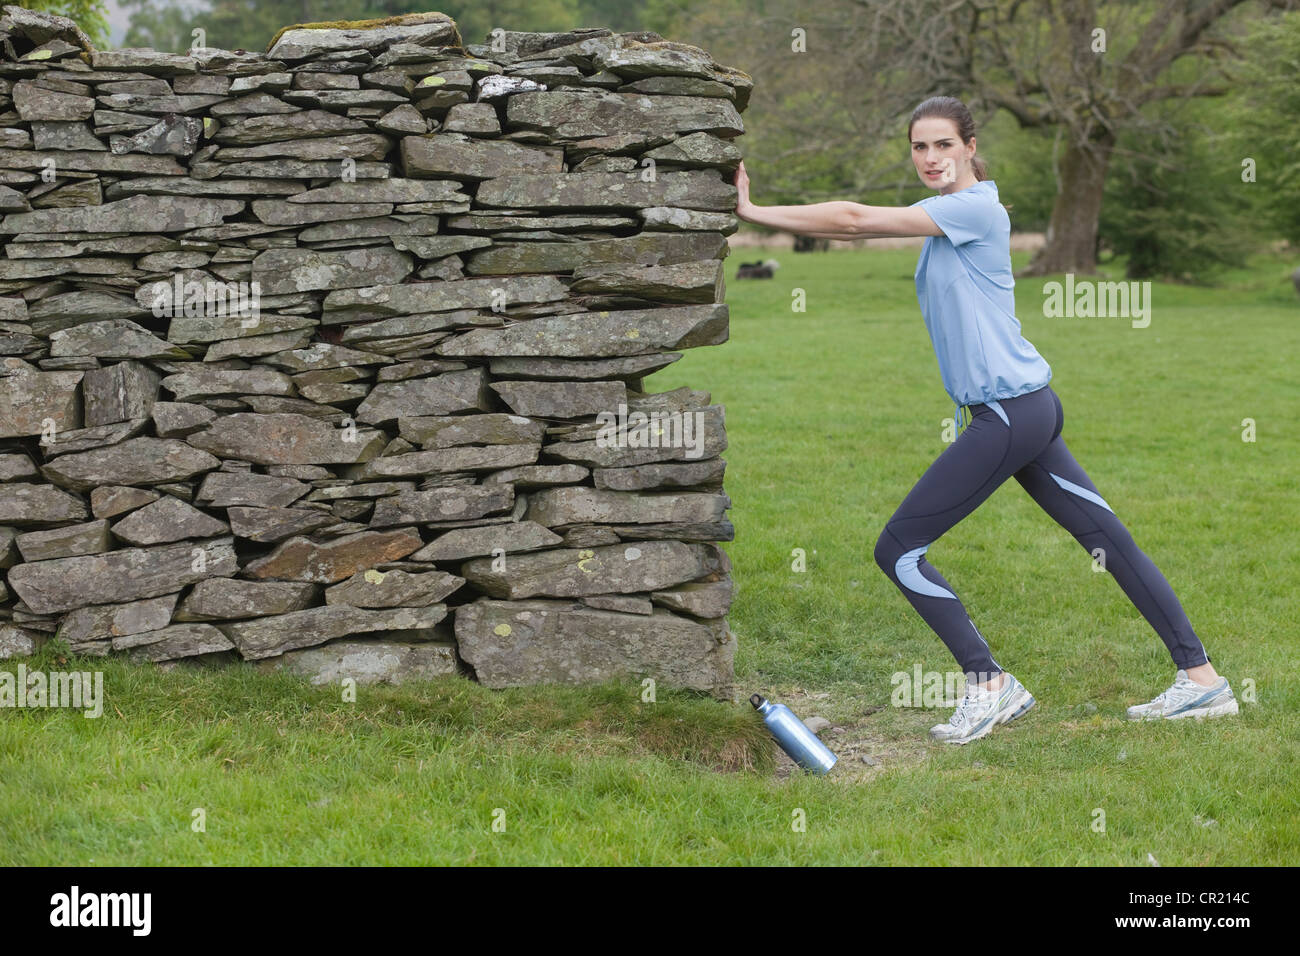 Runner stretching contre rock wall Banque D'Images